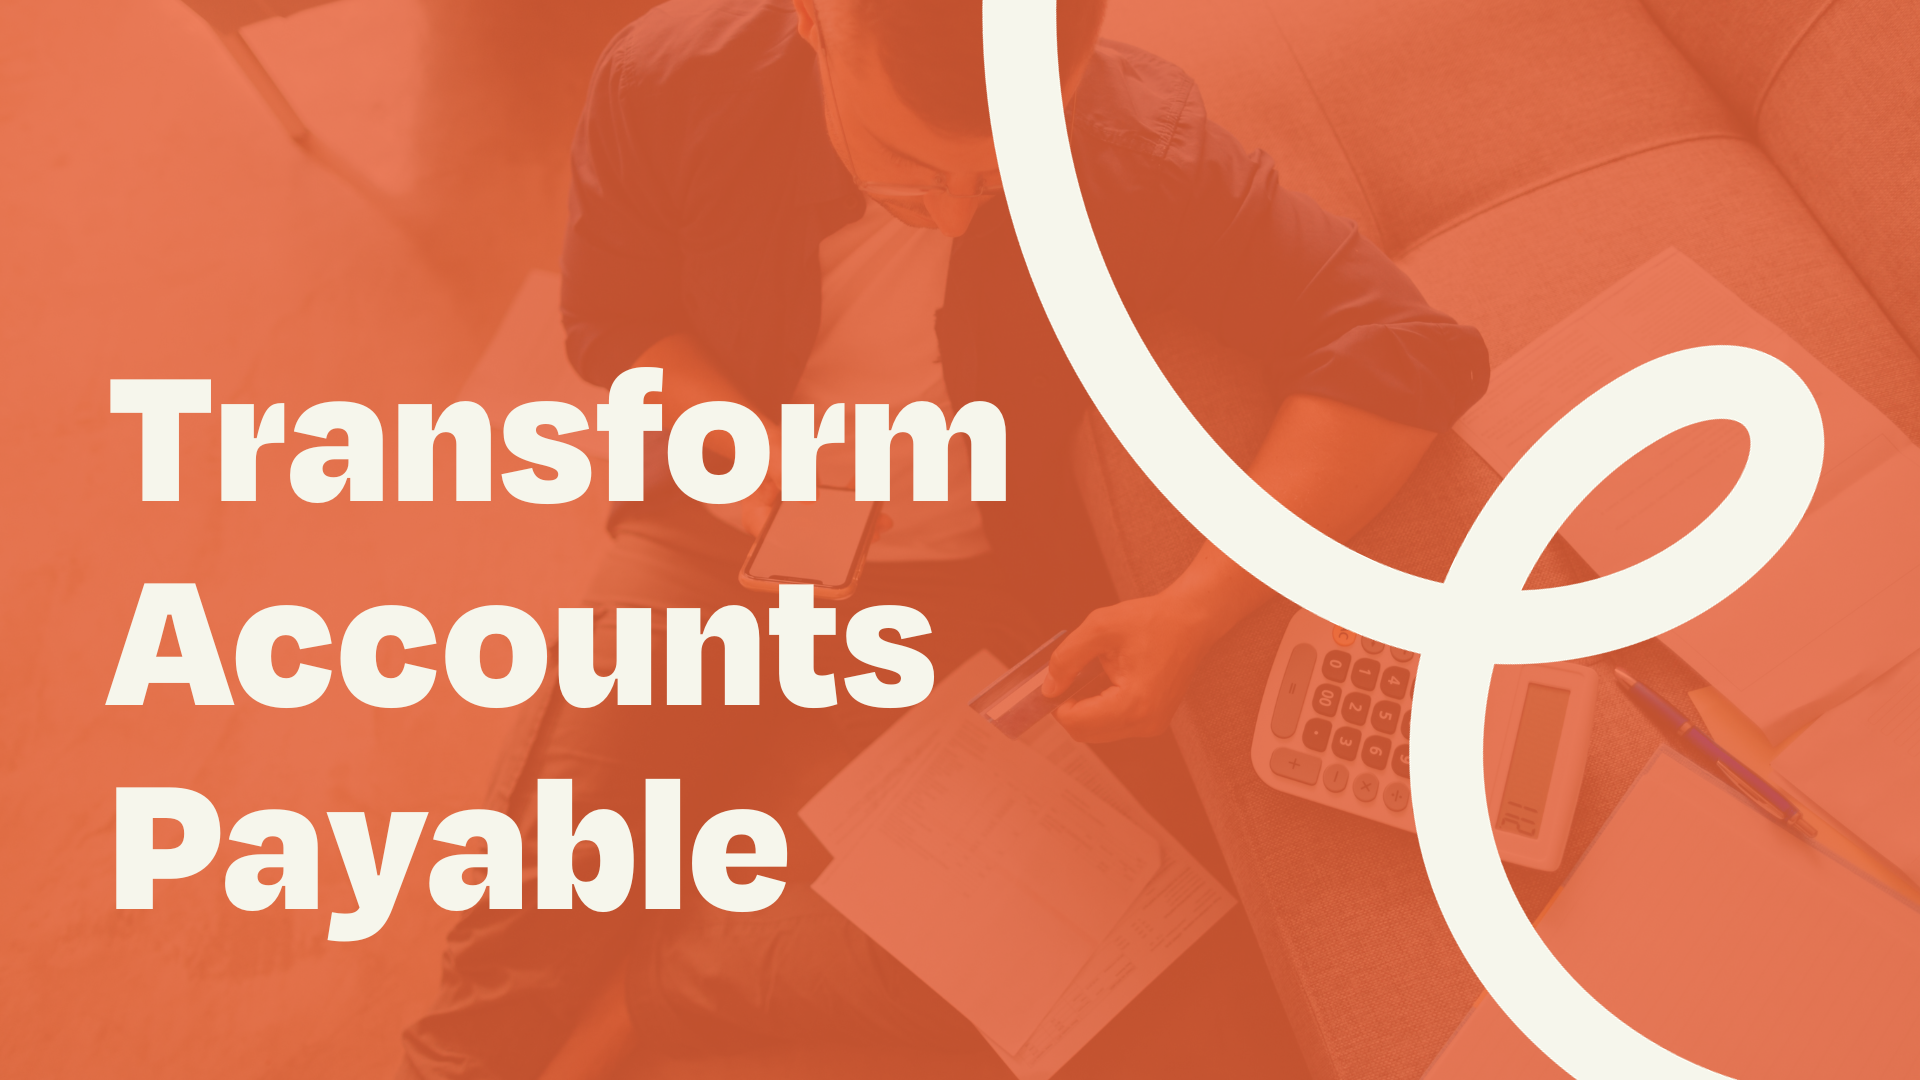 Transform Your Accounts Payable Process with Automated Efficiency